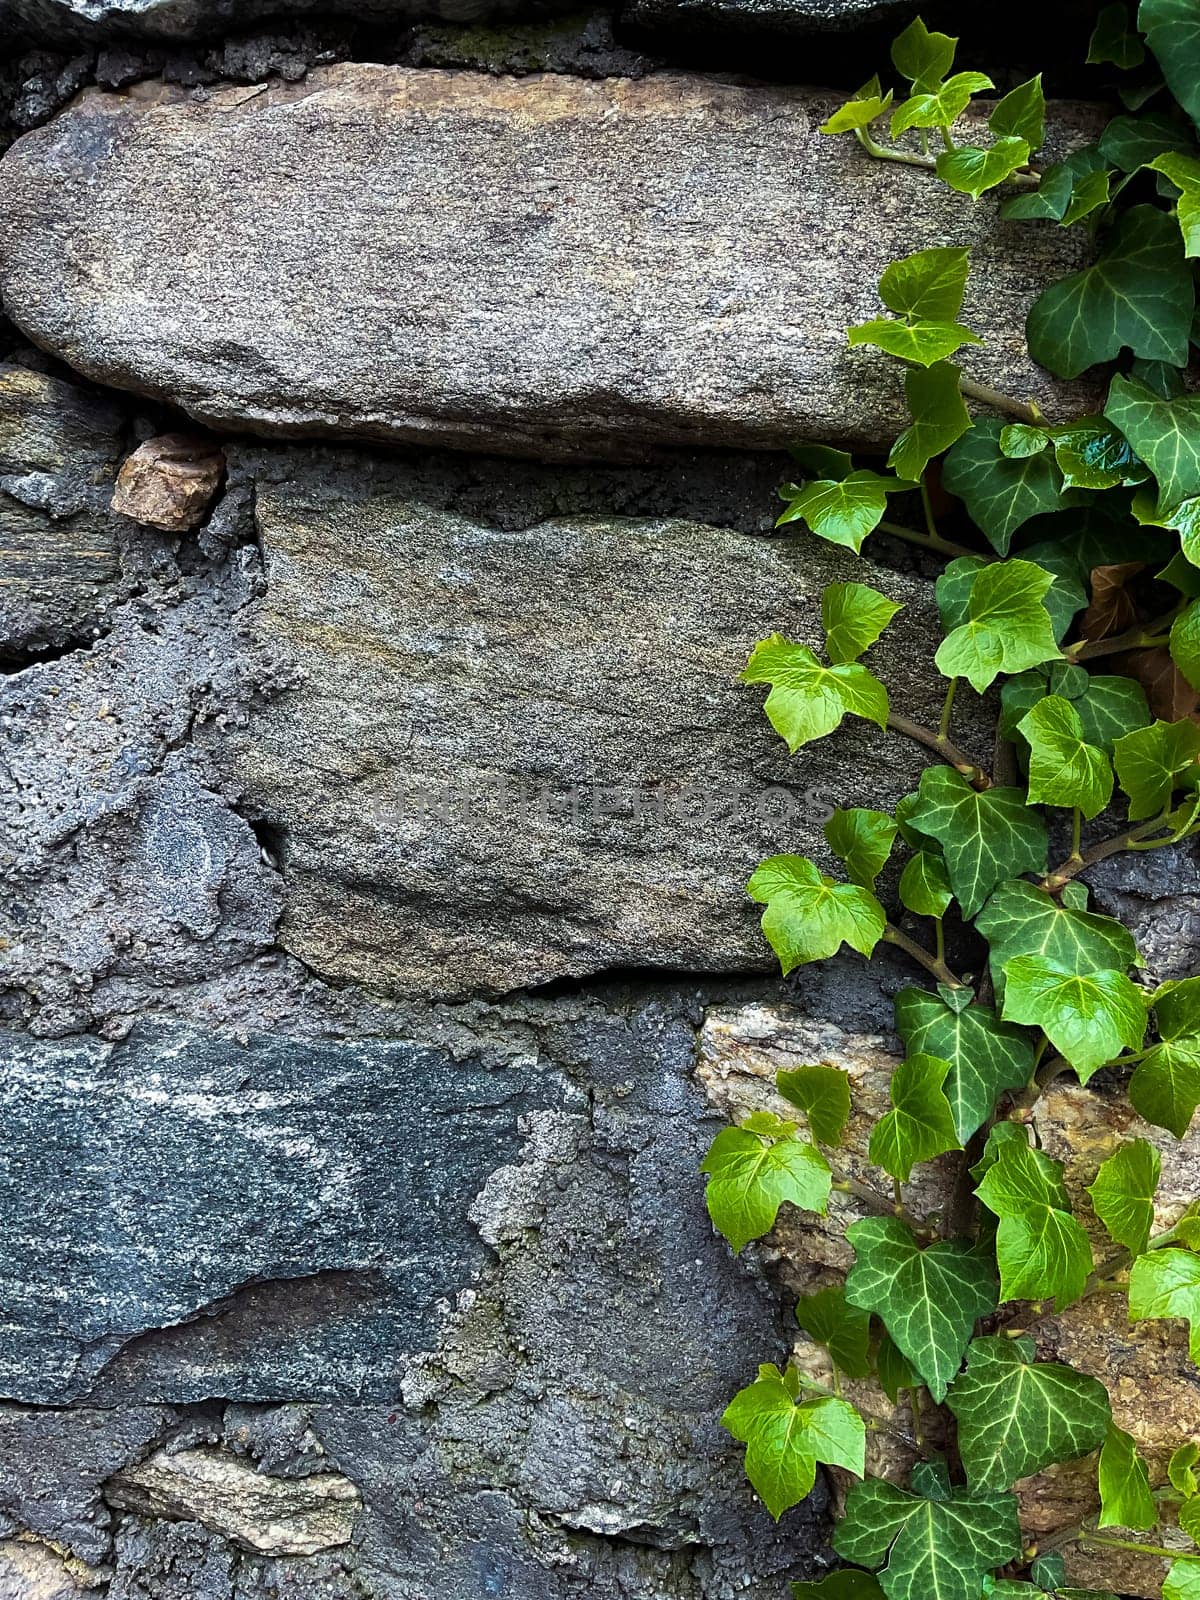 Climbing ivy on a brick wall. Green leaves and branches of ivy on a stone wall. by Lunnica